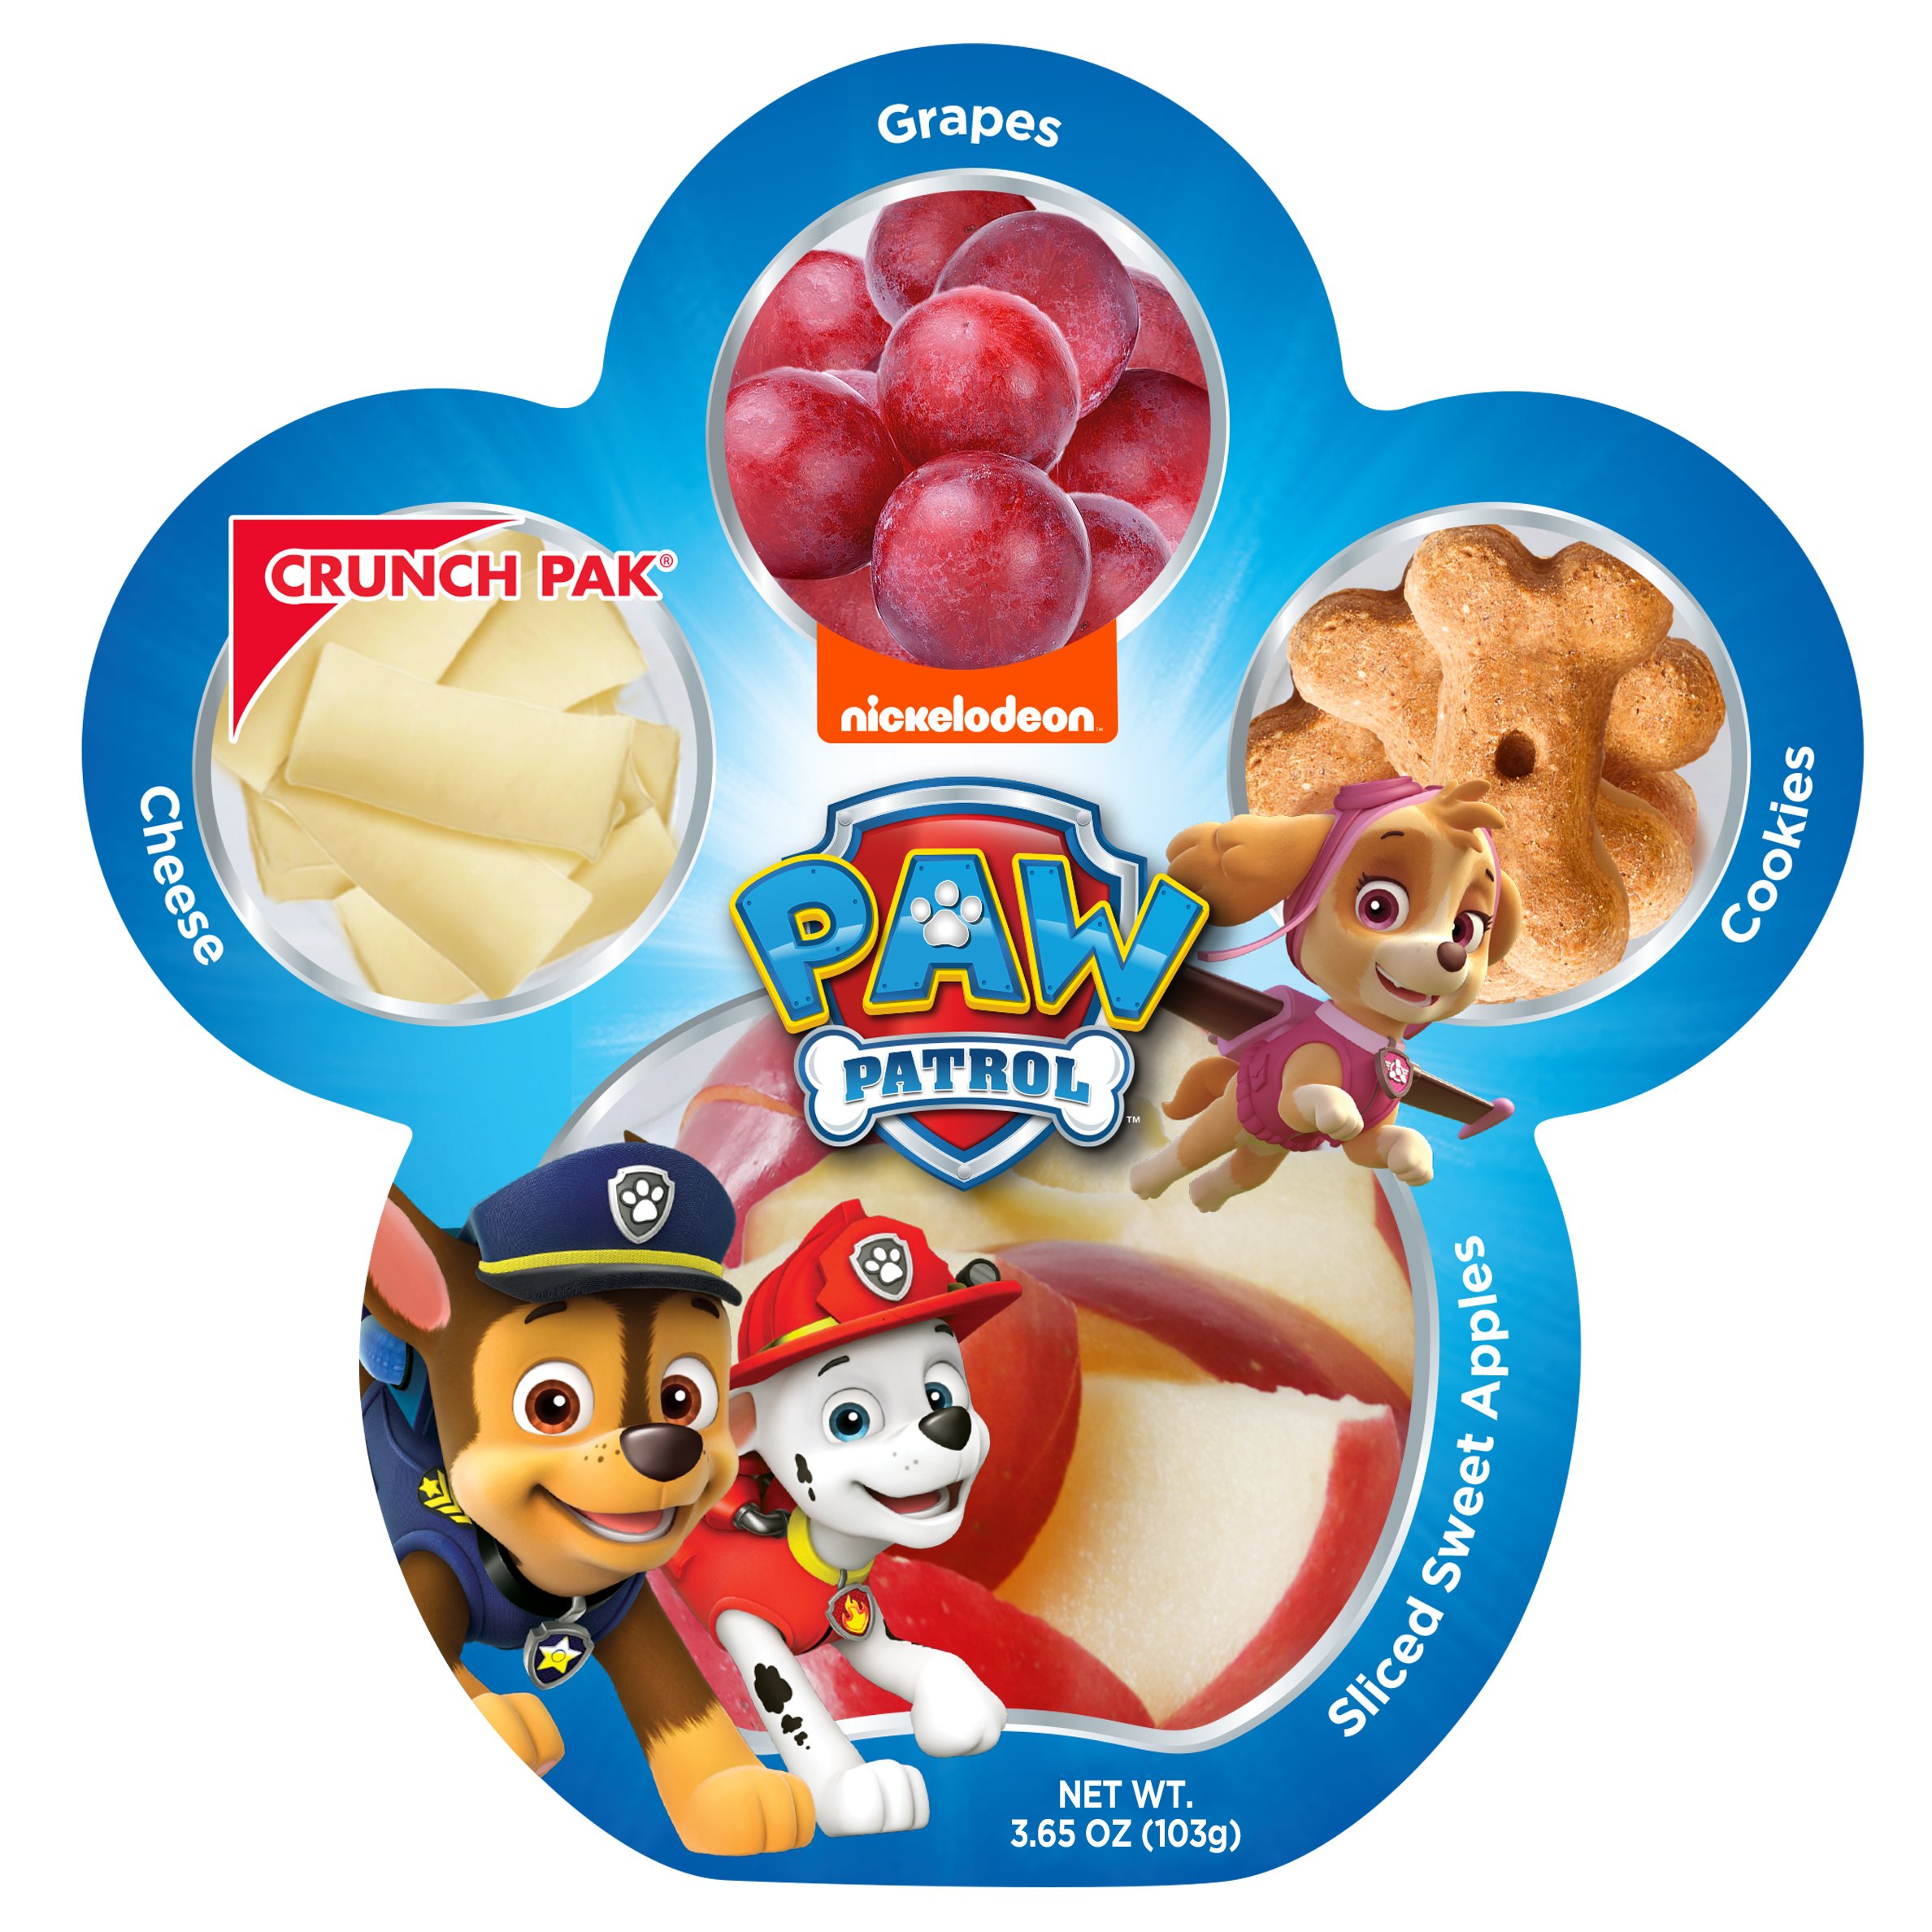 Crunch Pak Nickelodeon Paw Patrol Snack Pack - Apples, Cookies, Cheese & Grapes - Trays at H-E-B